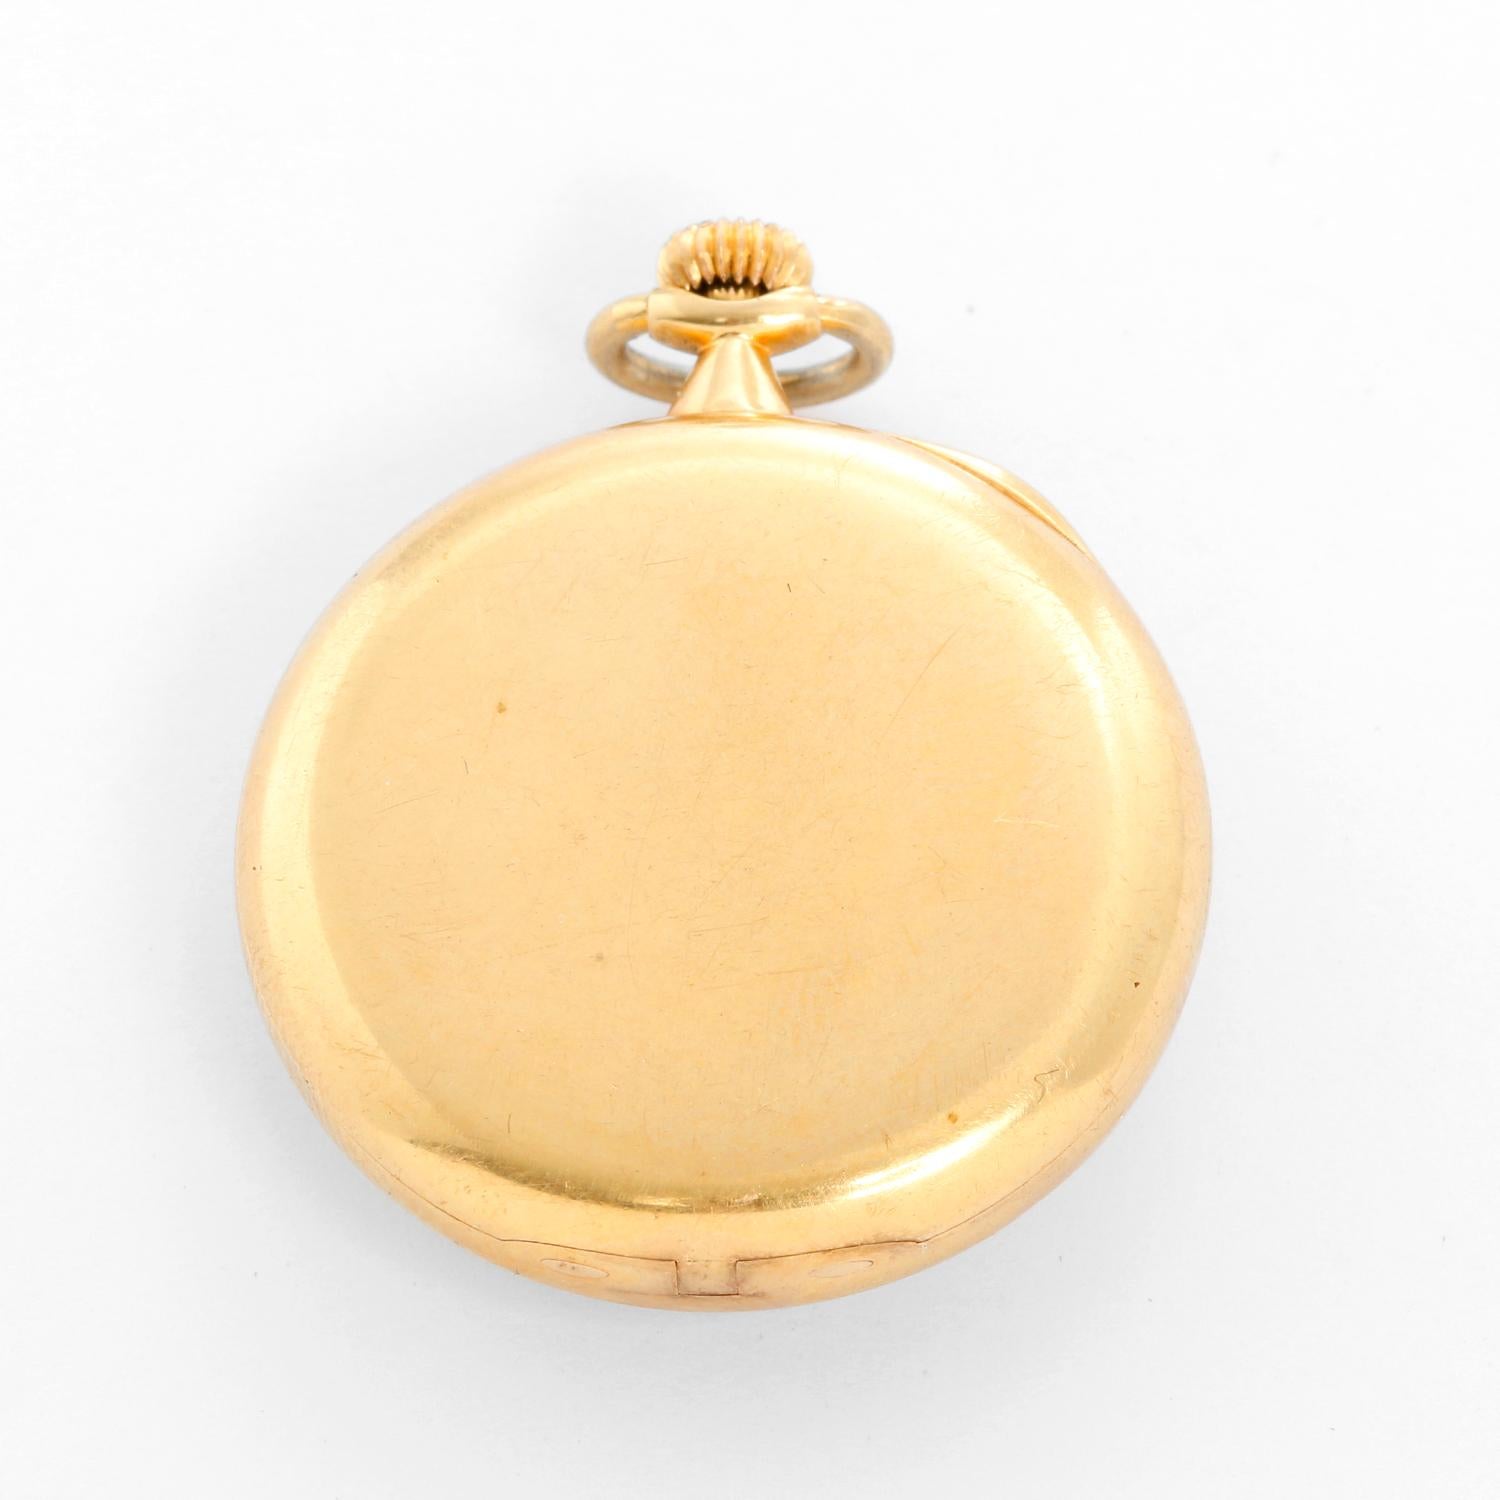 Patek Philippe Pendant Watch for Tiffany & Co. - Manual winding. Solid 18k yellow gold  with inside case back engraving. (32 mm). White enamel dial with black Breguet numerals; signed Tiffany & Co.; subseconds at 6 o'clock. Pre-owned, vintage, ca.